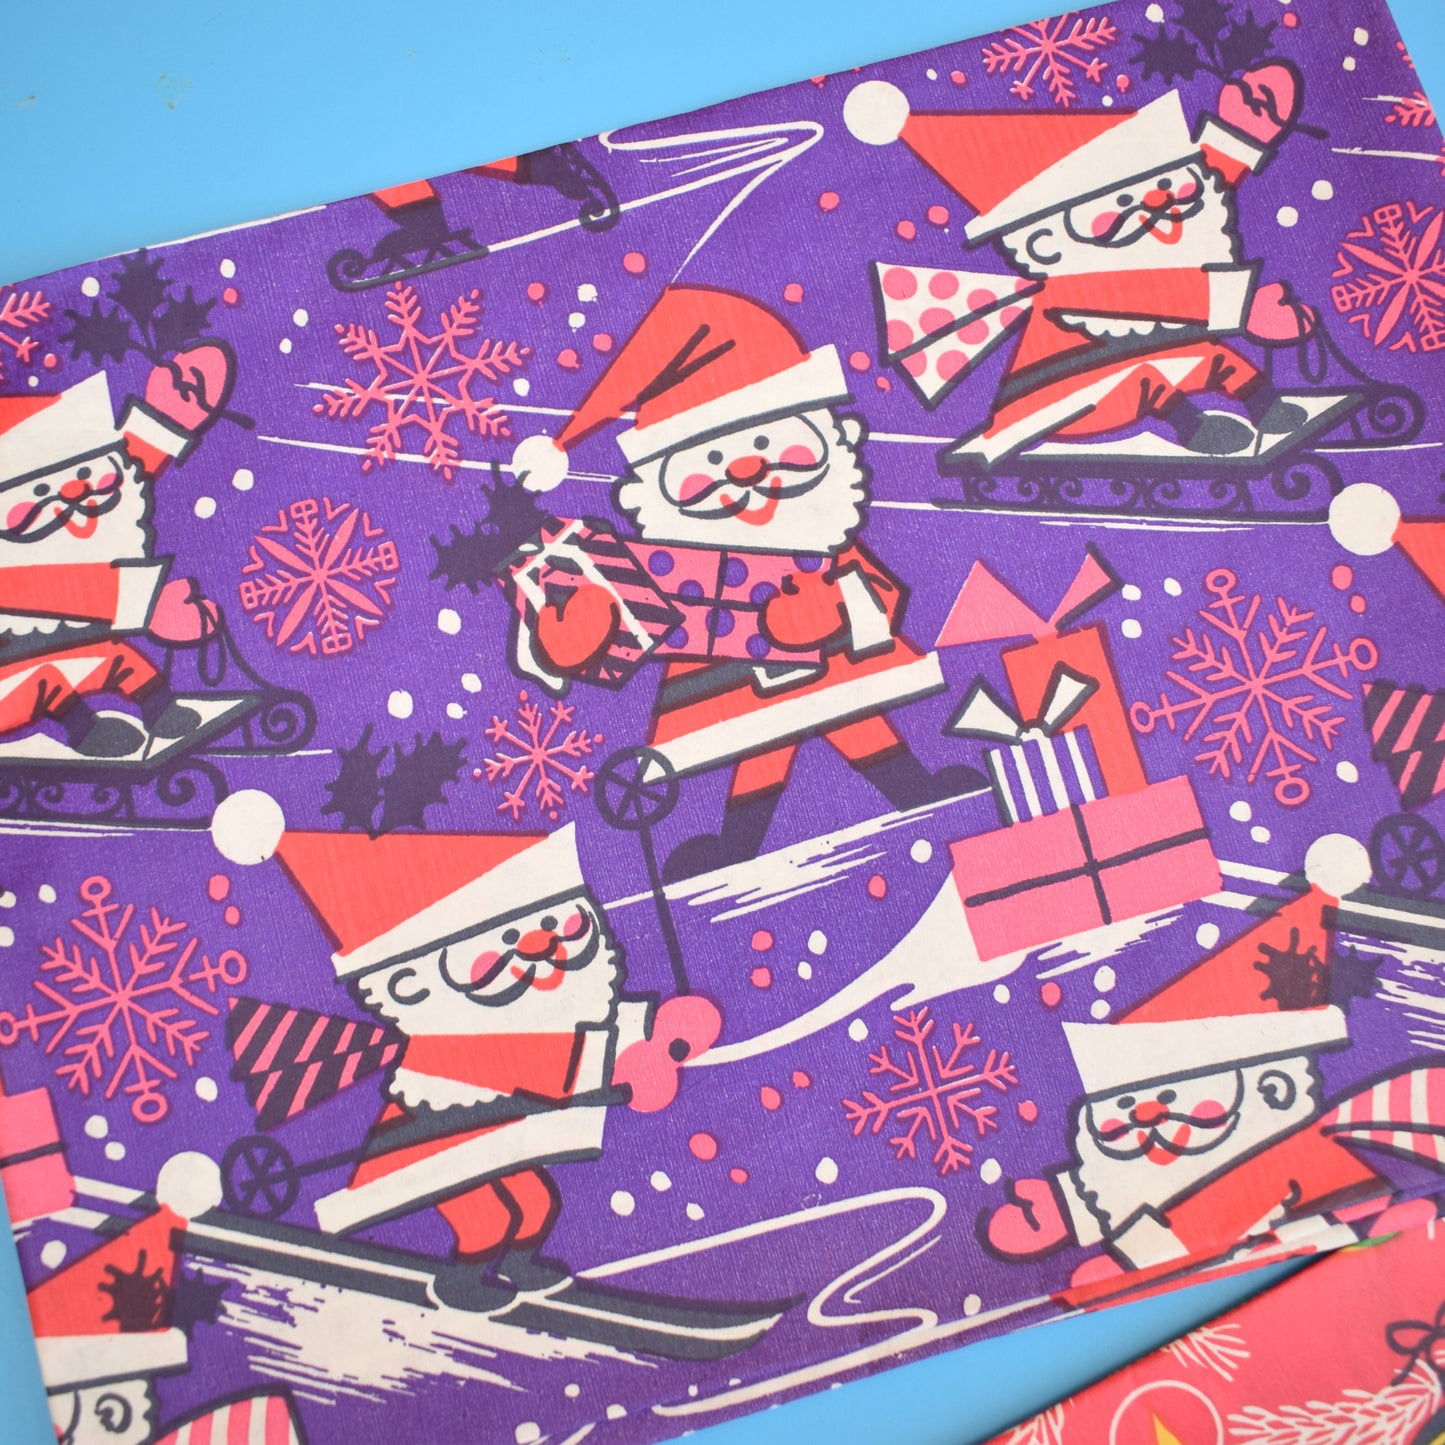 Vintage 1960s Christmas Gift Wrap Paper Pack (4 Shets)